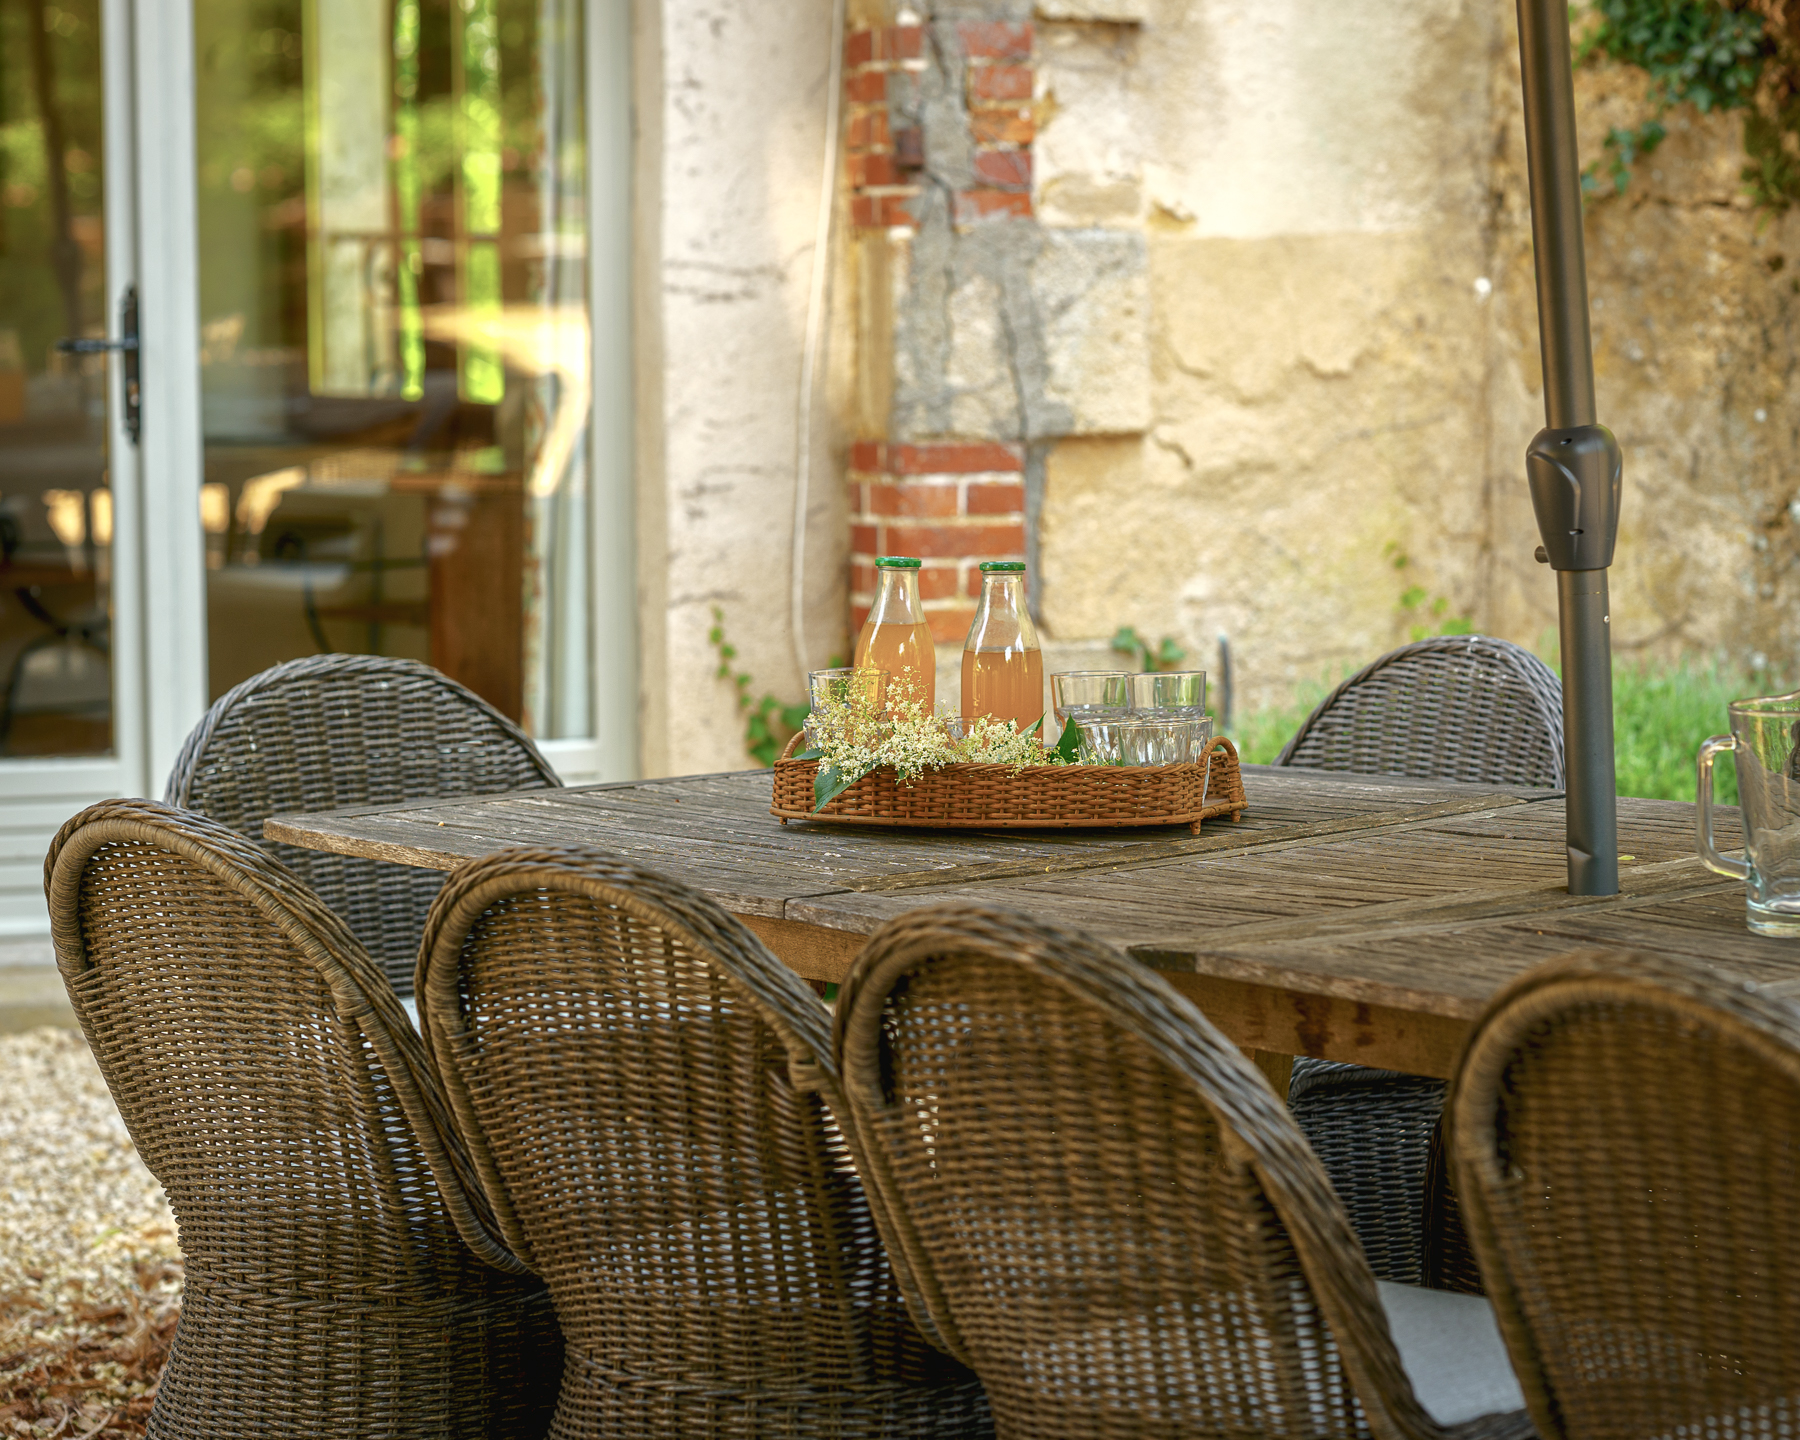 Outdoor dining and seating at chateau de la vigne